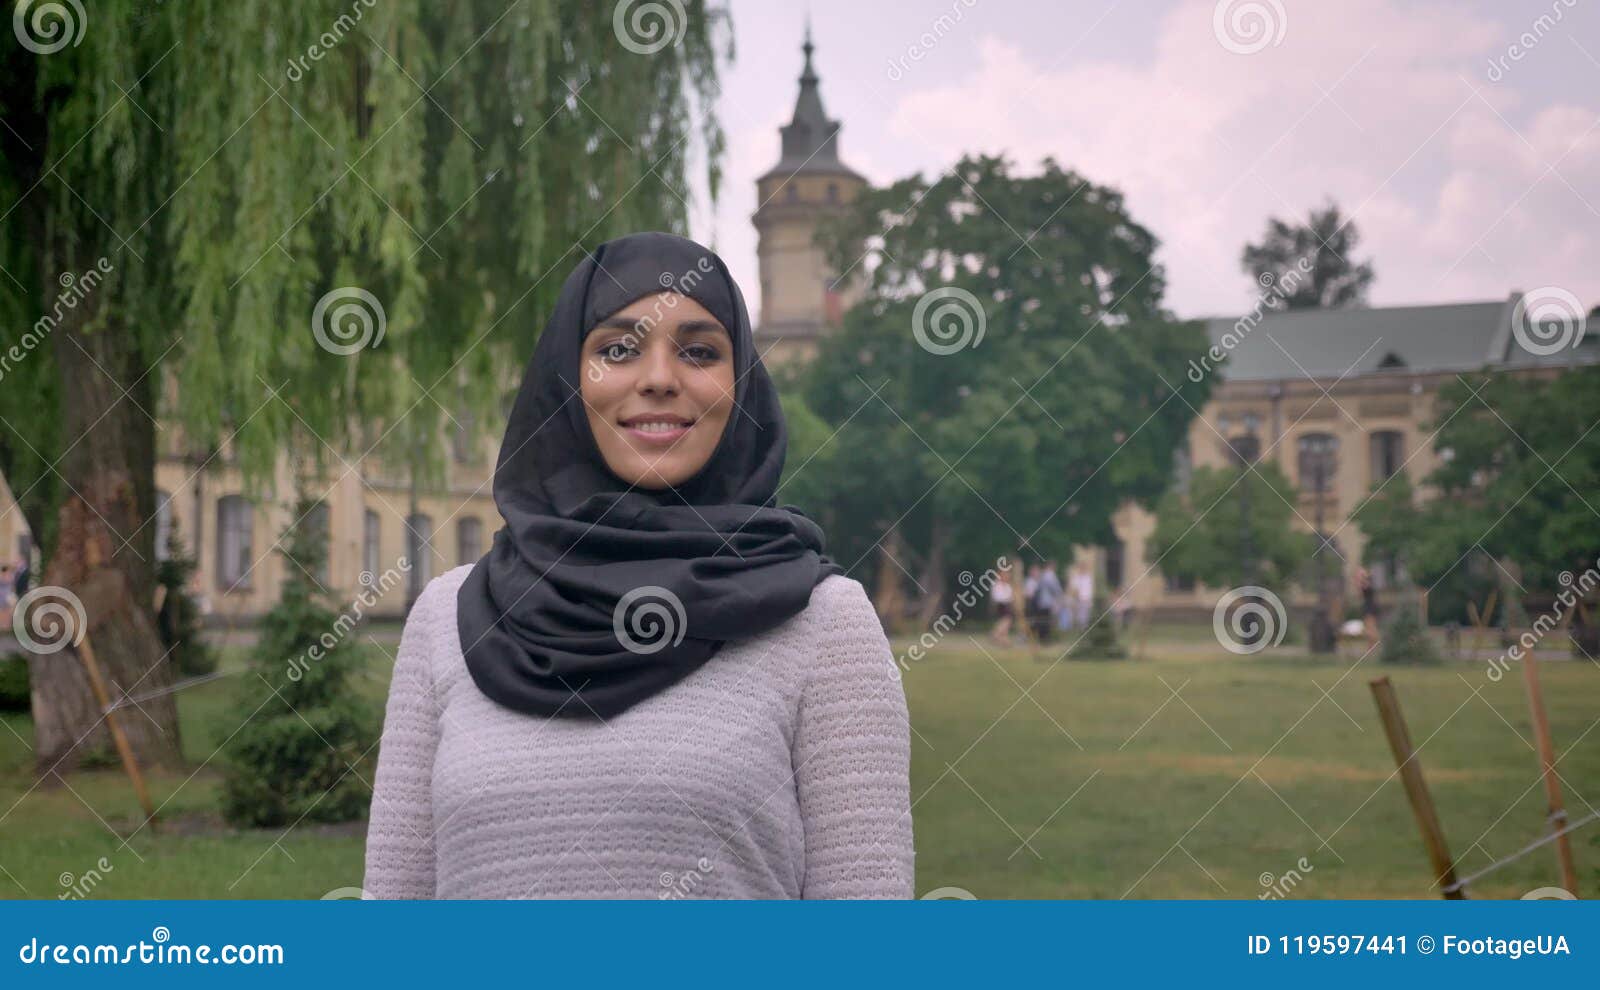 Young Sweet Muslim Girl In Hijab Is Standing And Smiling In Daytime In